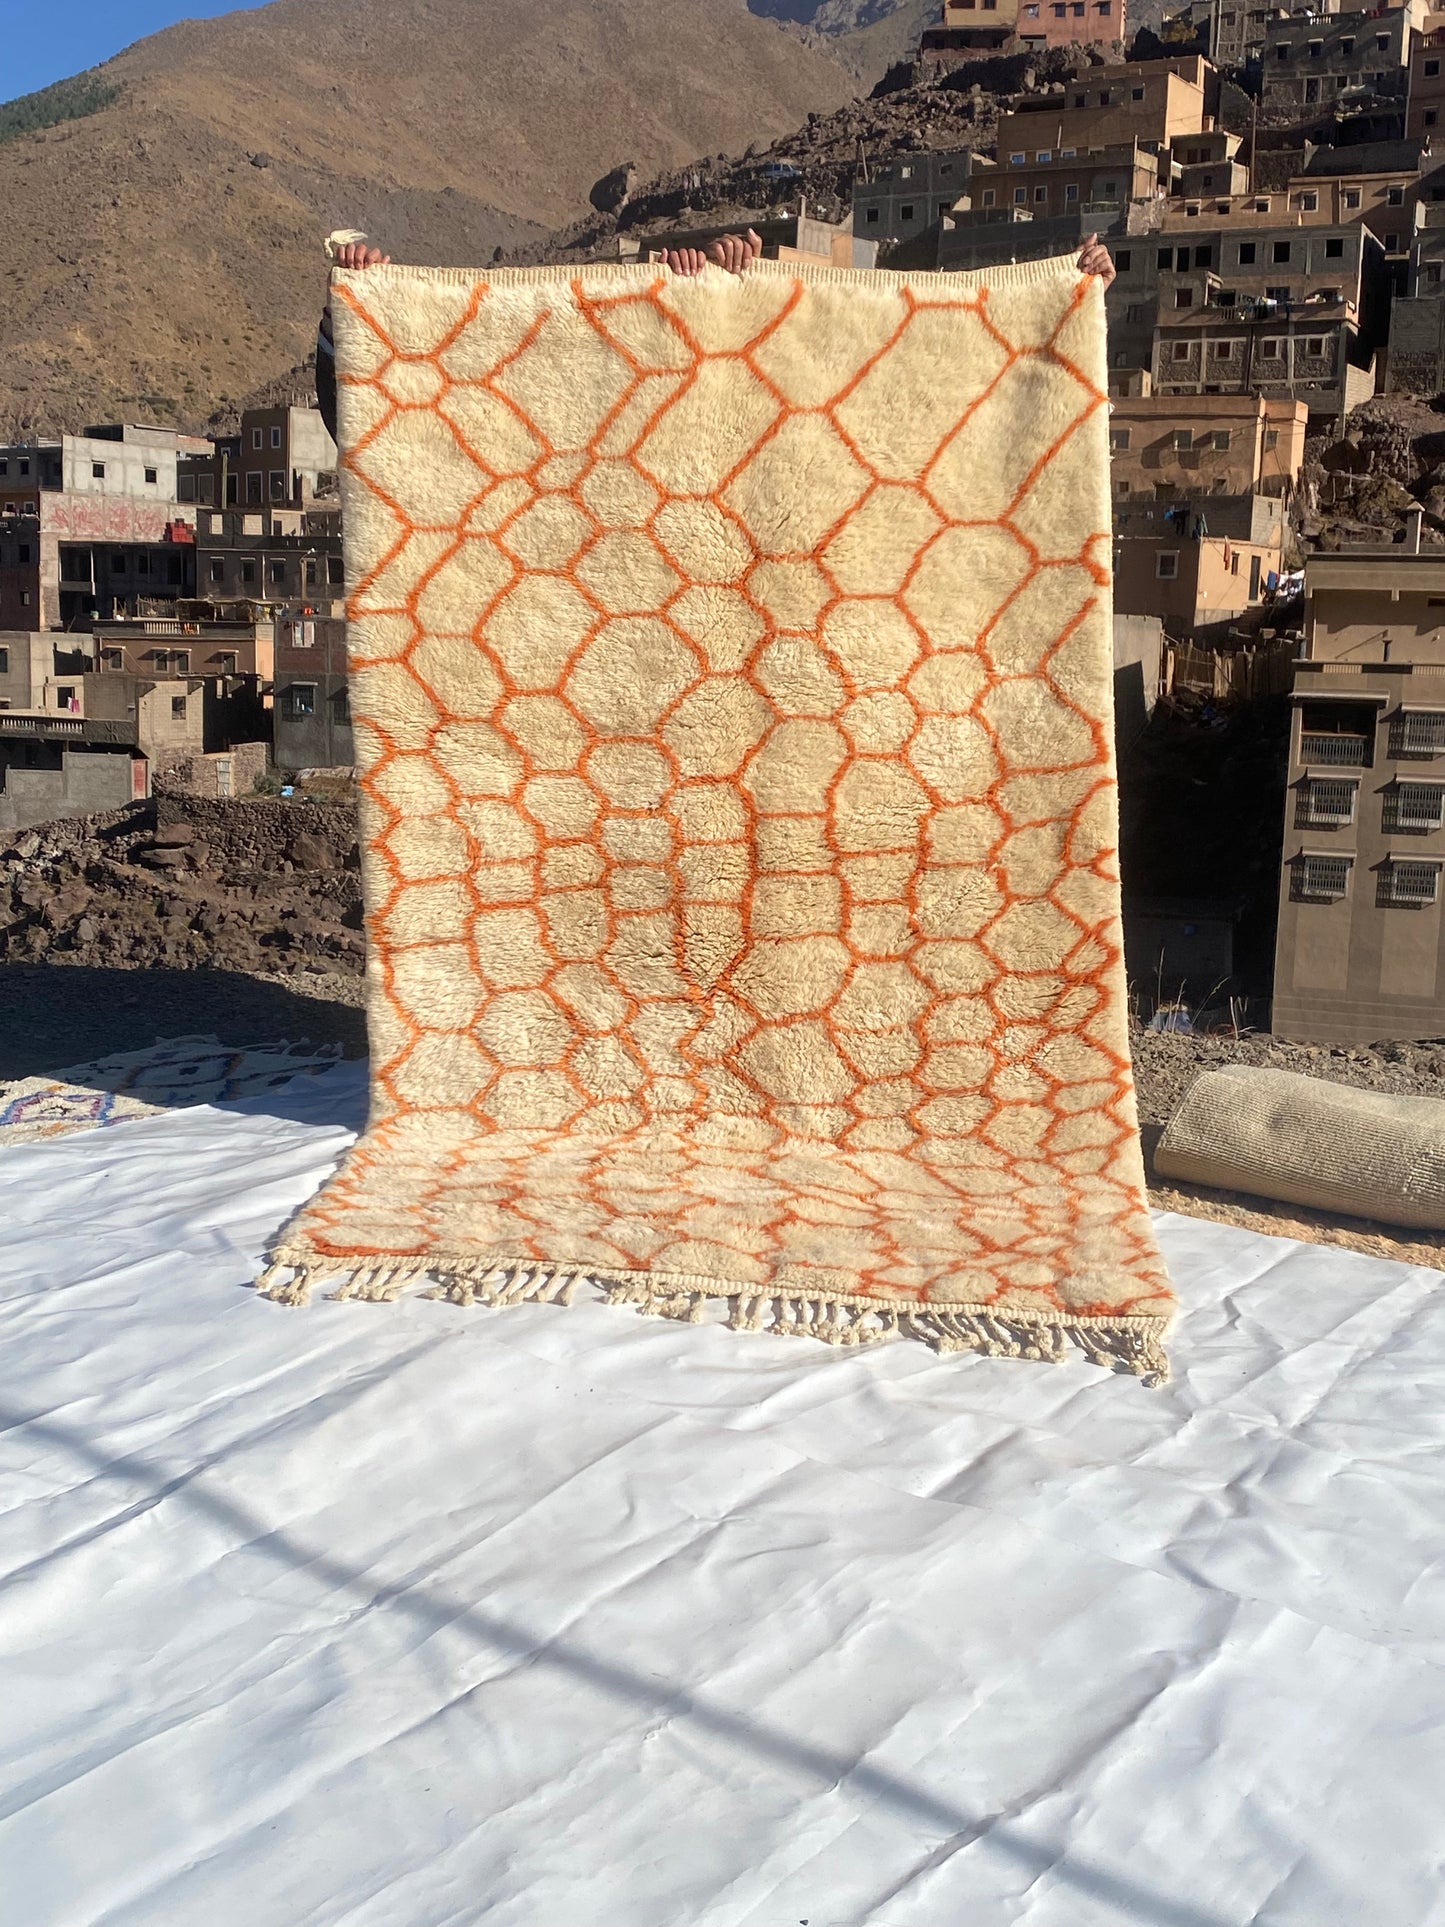 Beni Ourain rugs originate from the Atlas Mountains of Morocco and are characterized by their distinctive, neutral-toned, and geometric designs. These handwoven rugs often feature a plush pile and are made by the Berber tribes,  size is 255x155 cm